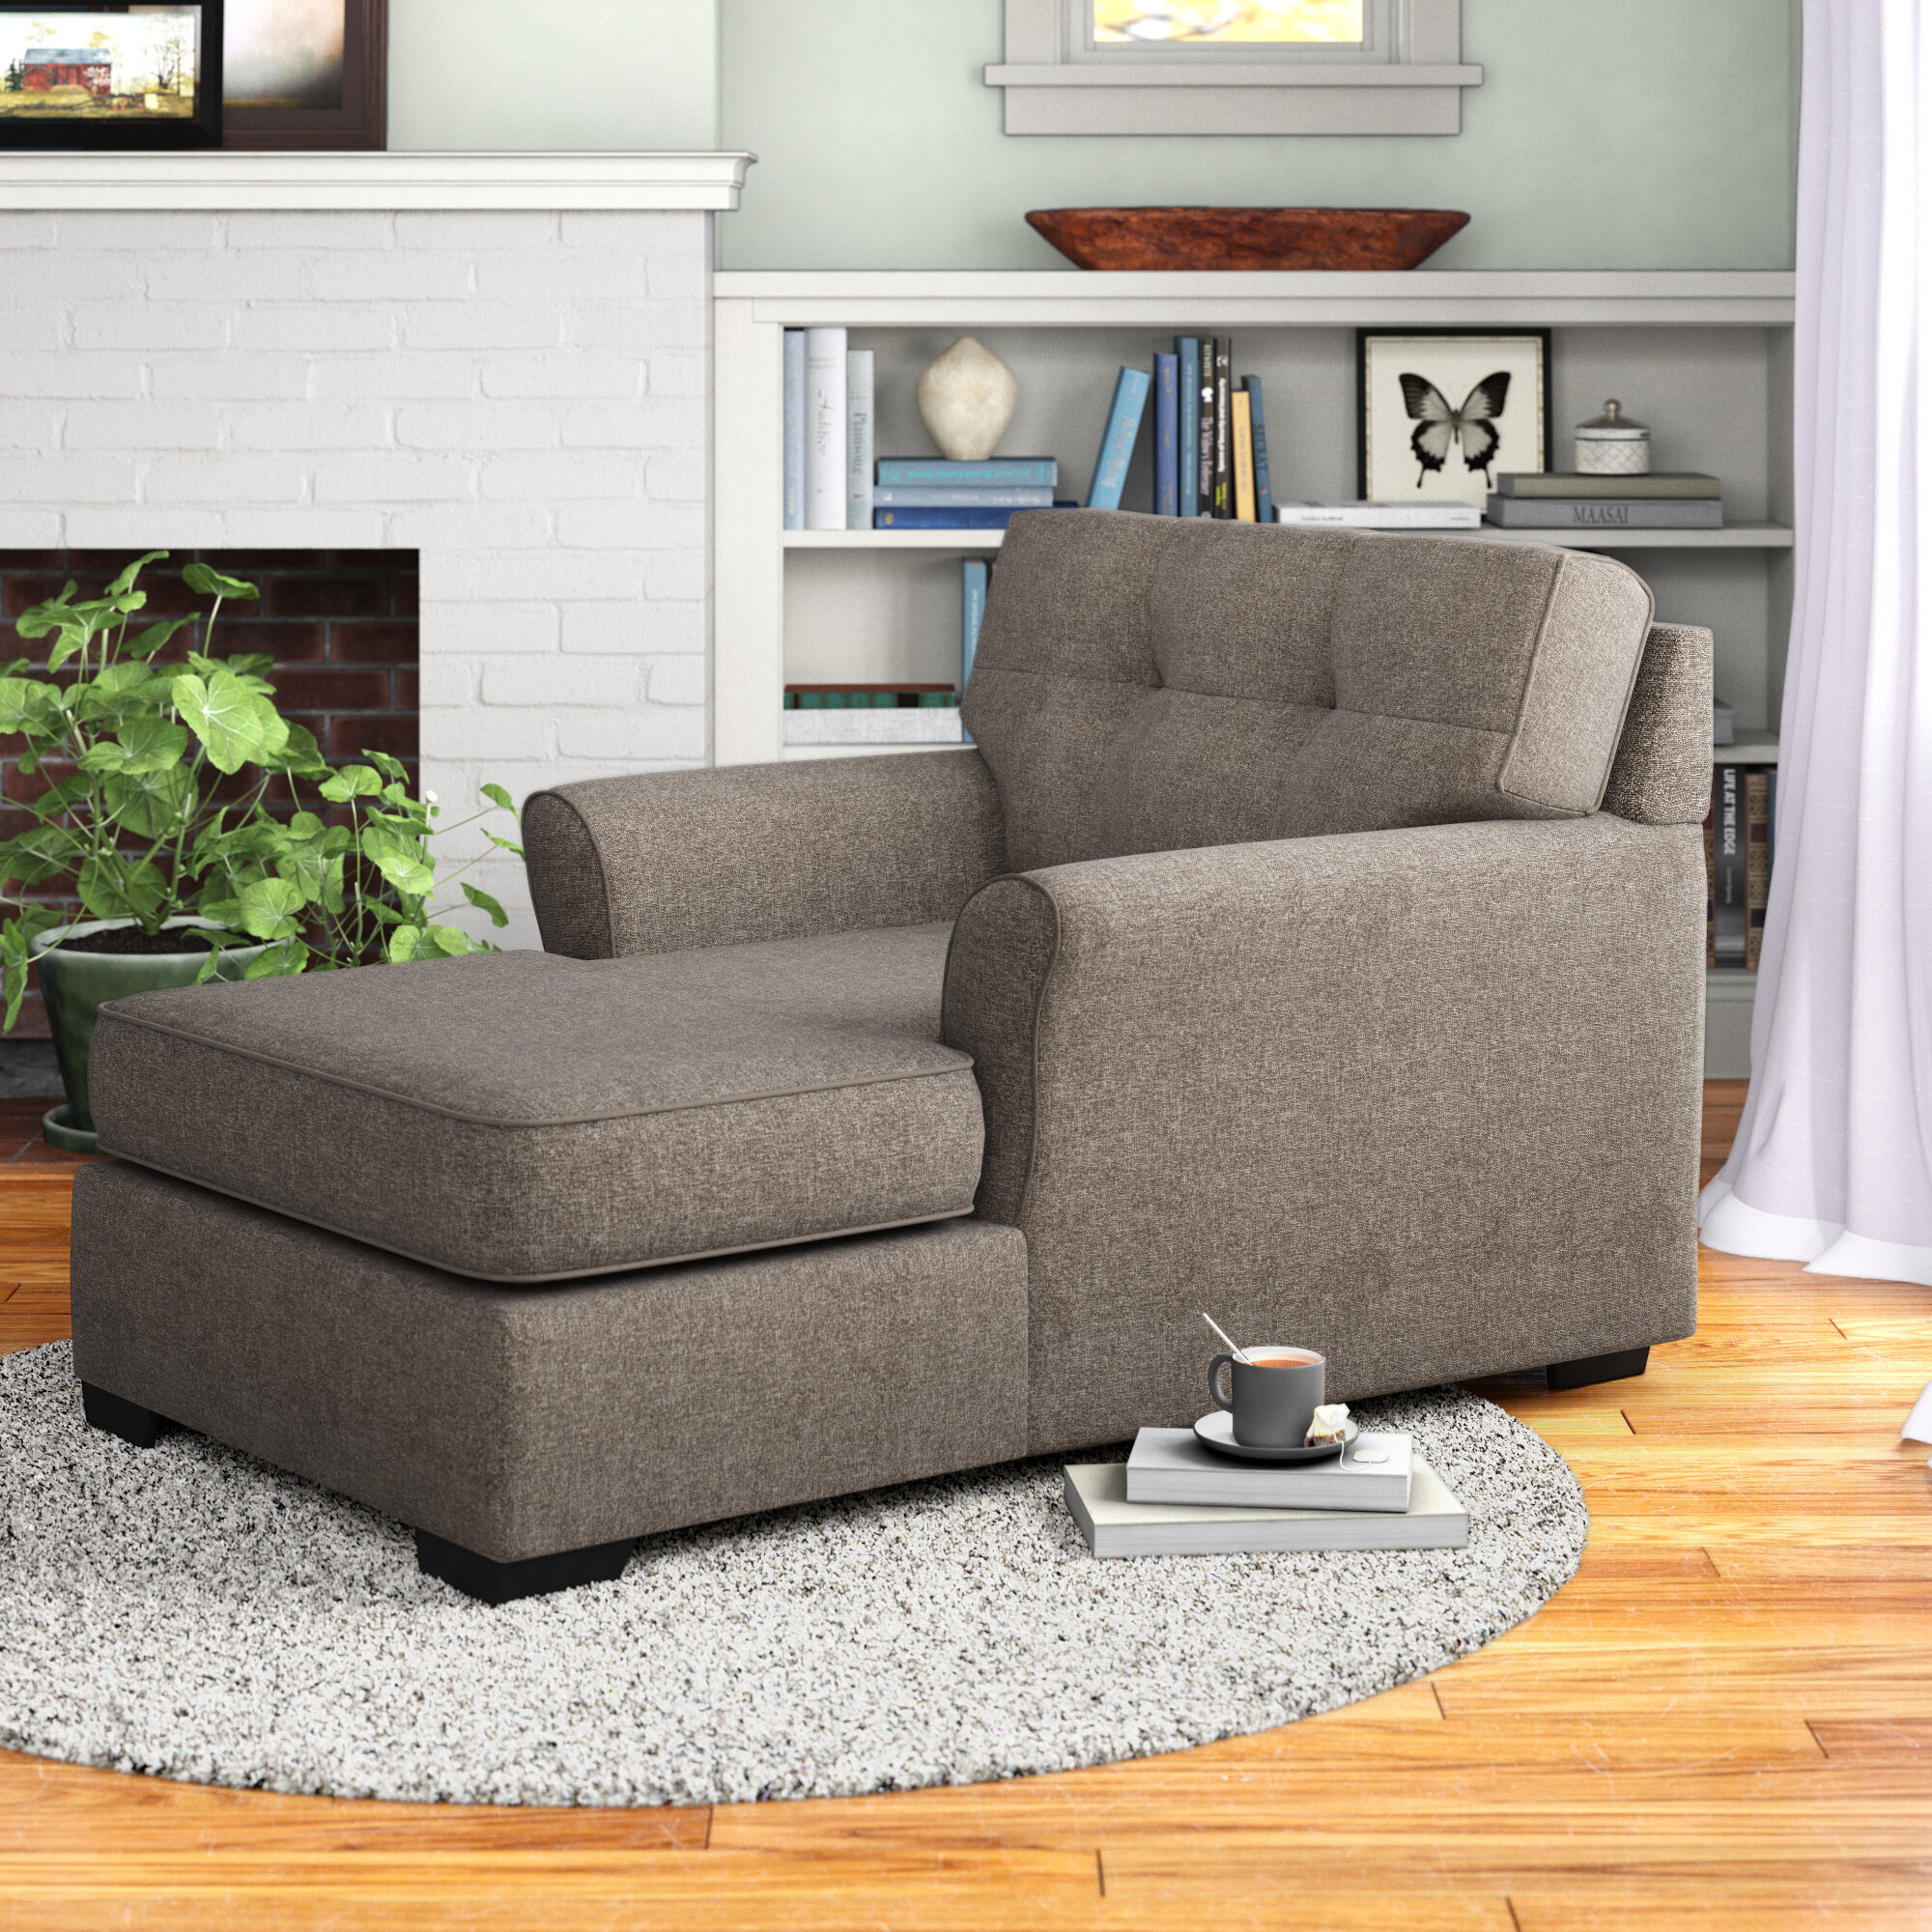 Ashworth Upholstered Chaise Lounge